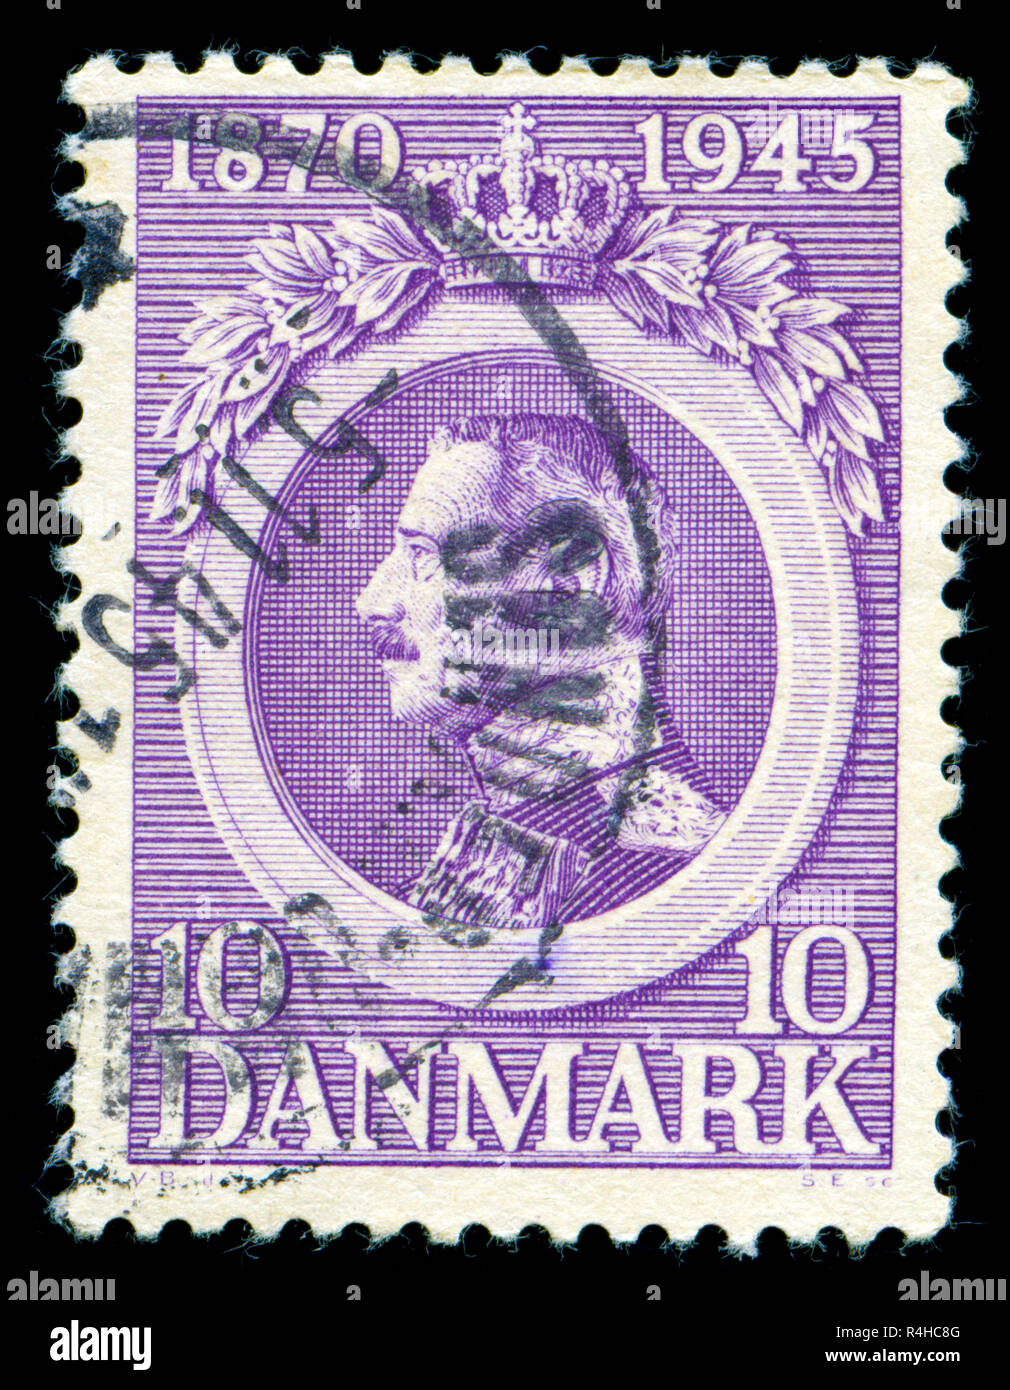 Postmarked stamp from Denmark in the King Christian X - 75th Anniversary series issued in 1945 Stock Photo